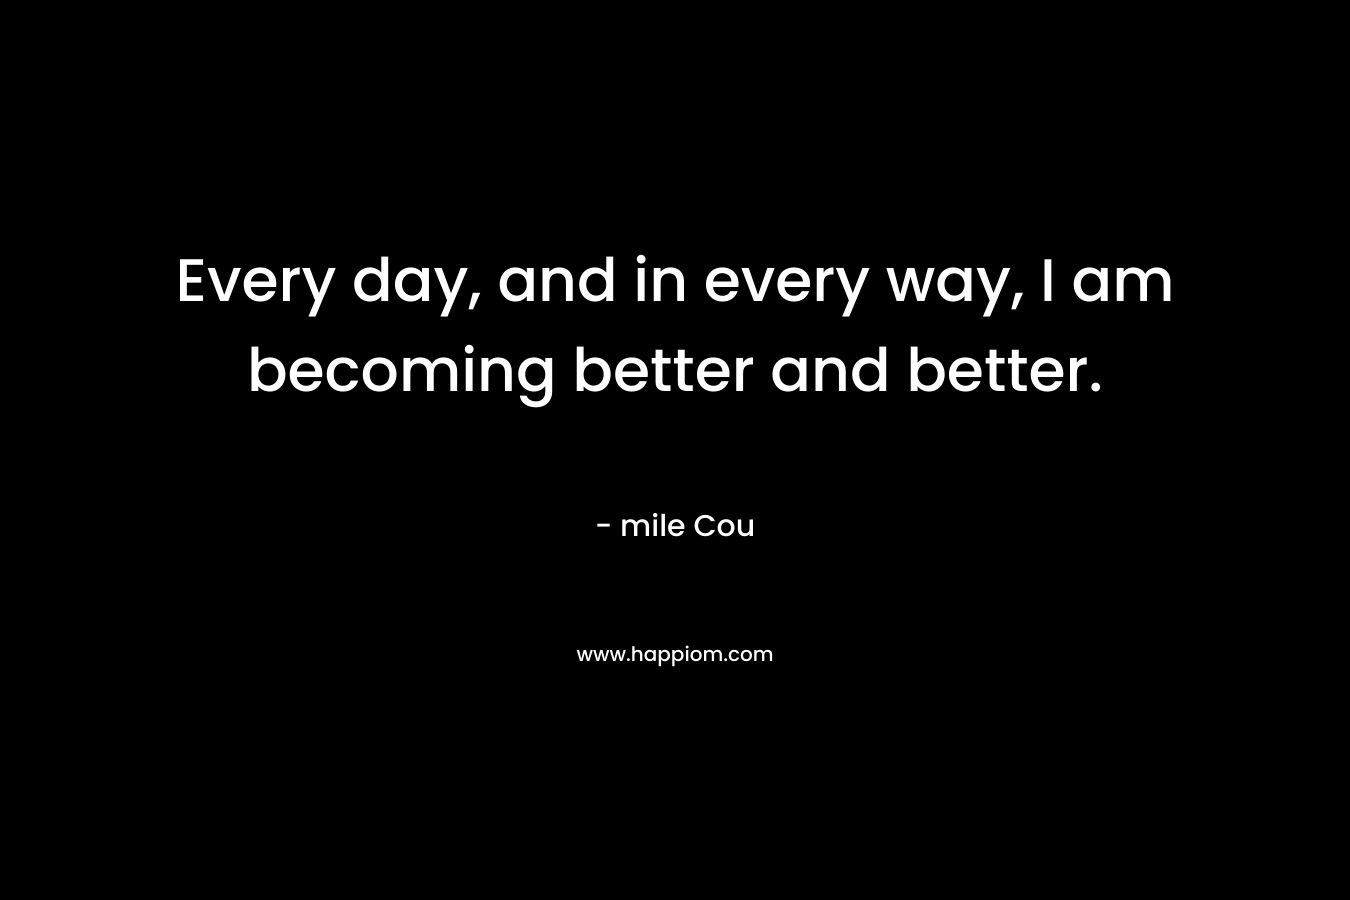 Every day, and in every way, I am becoming better and better.